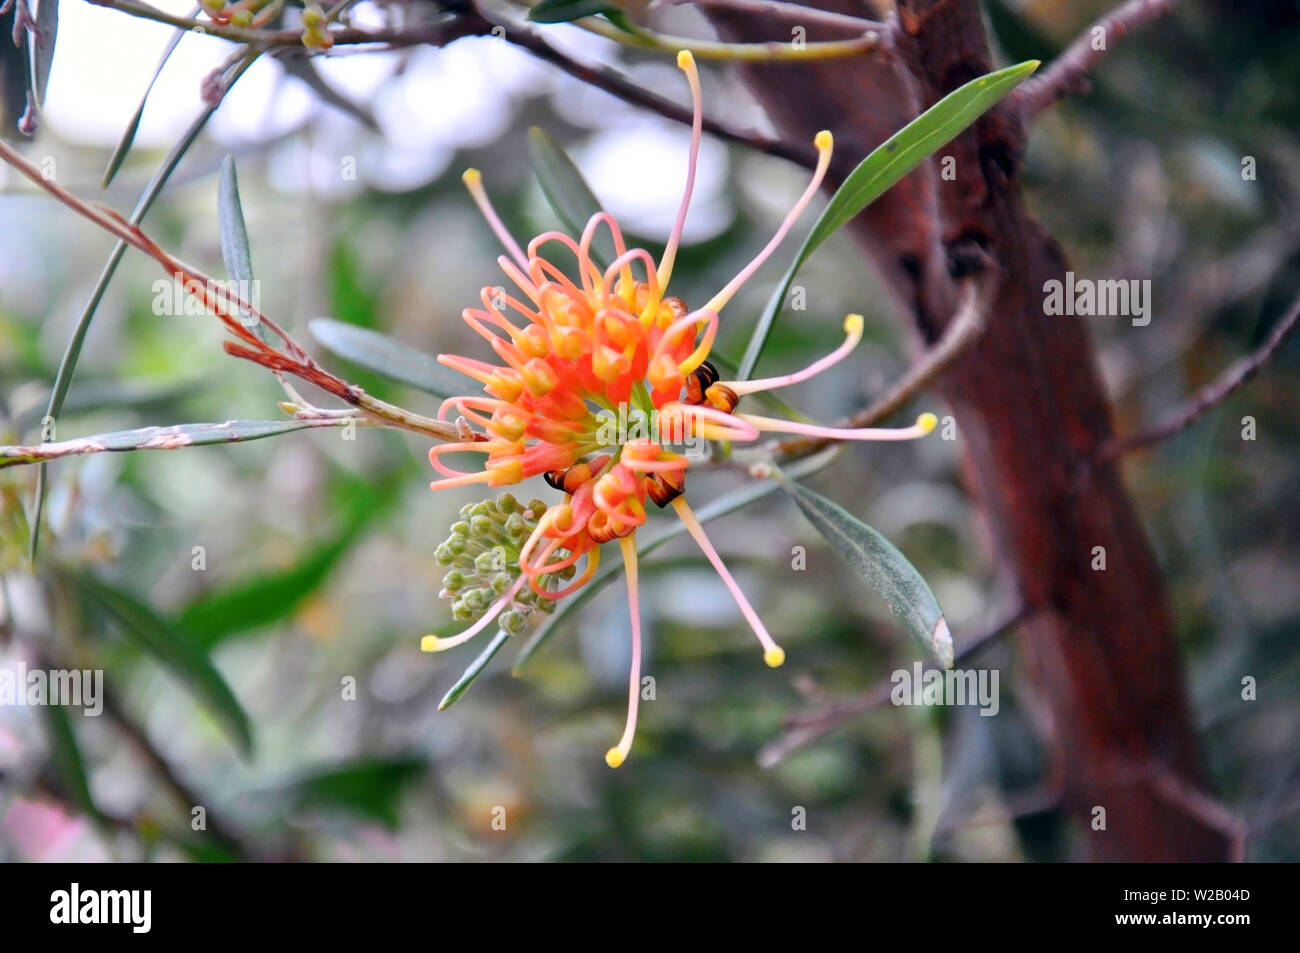 Australian Native Plant, Grevillea 'Apricot Glow', cultivar of Grevillea olivacea with clusters of apricot orange spider flowers in winter and spring. Stock Photo